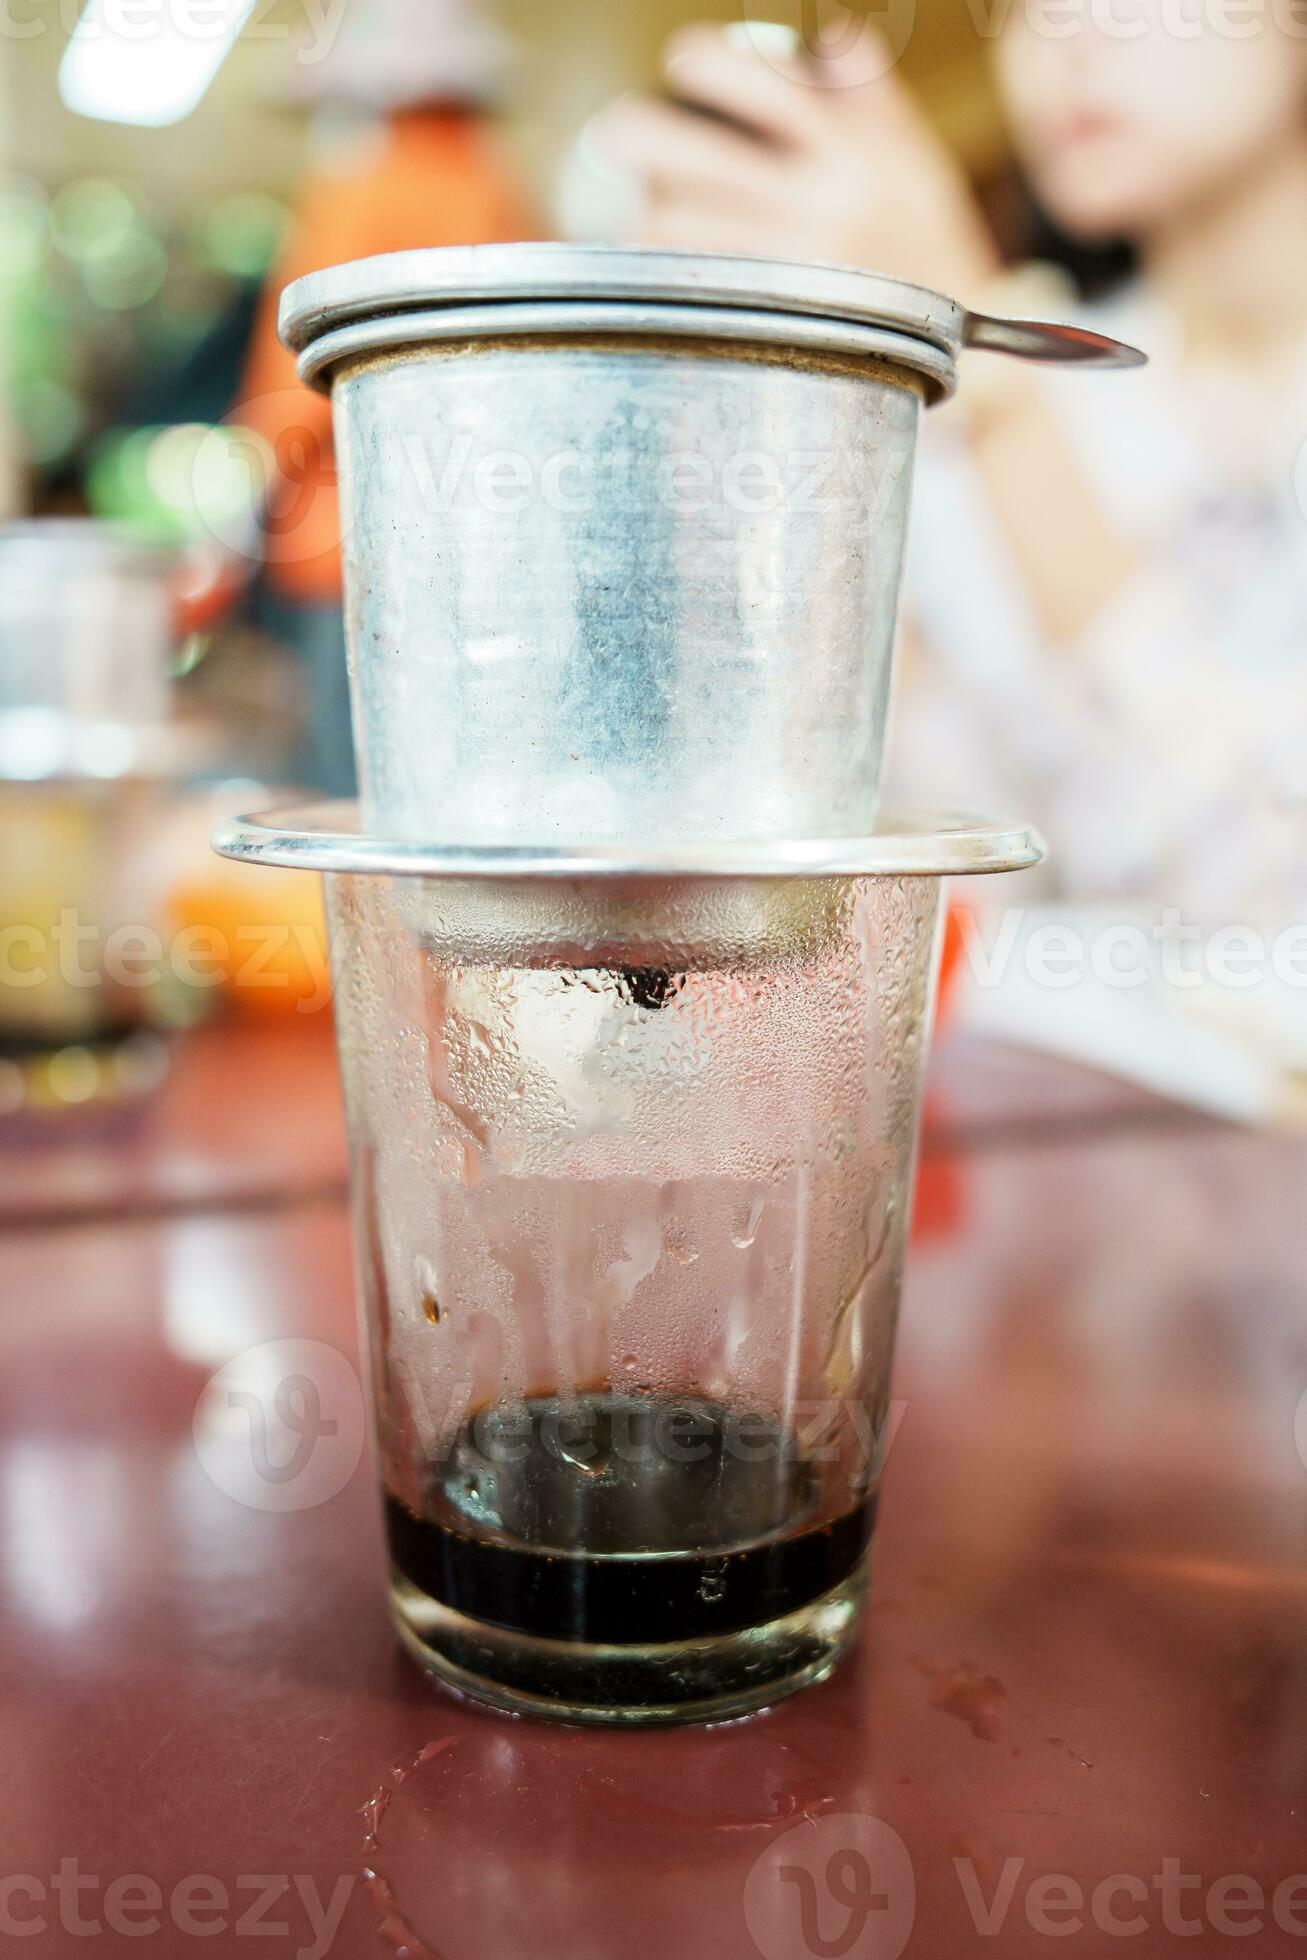 https://static.vecteezy.com/system/resources/previews/025/499/474/large_2x/vietnamese-coffee-in-glass-cups-traditional-metal-coffee-maker-phin-black-drip-coffee-as-famous-in-vietnam-photo.jpg